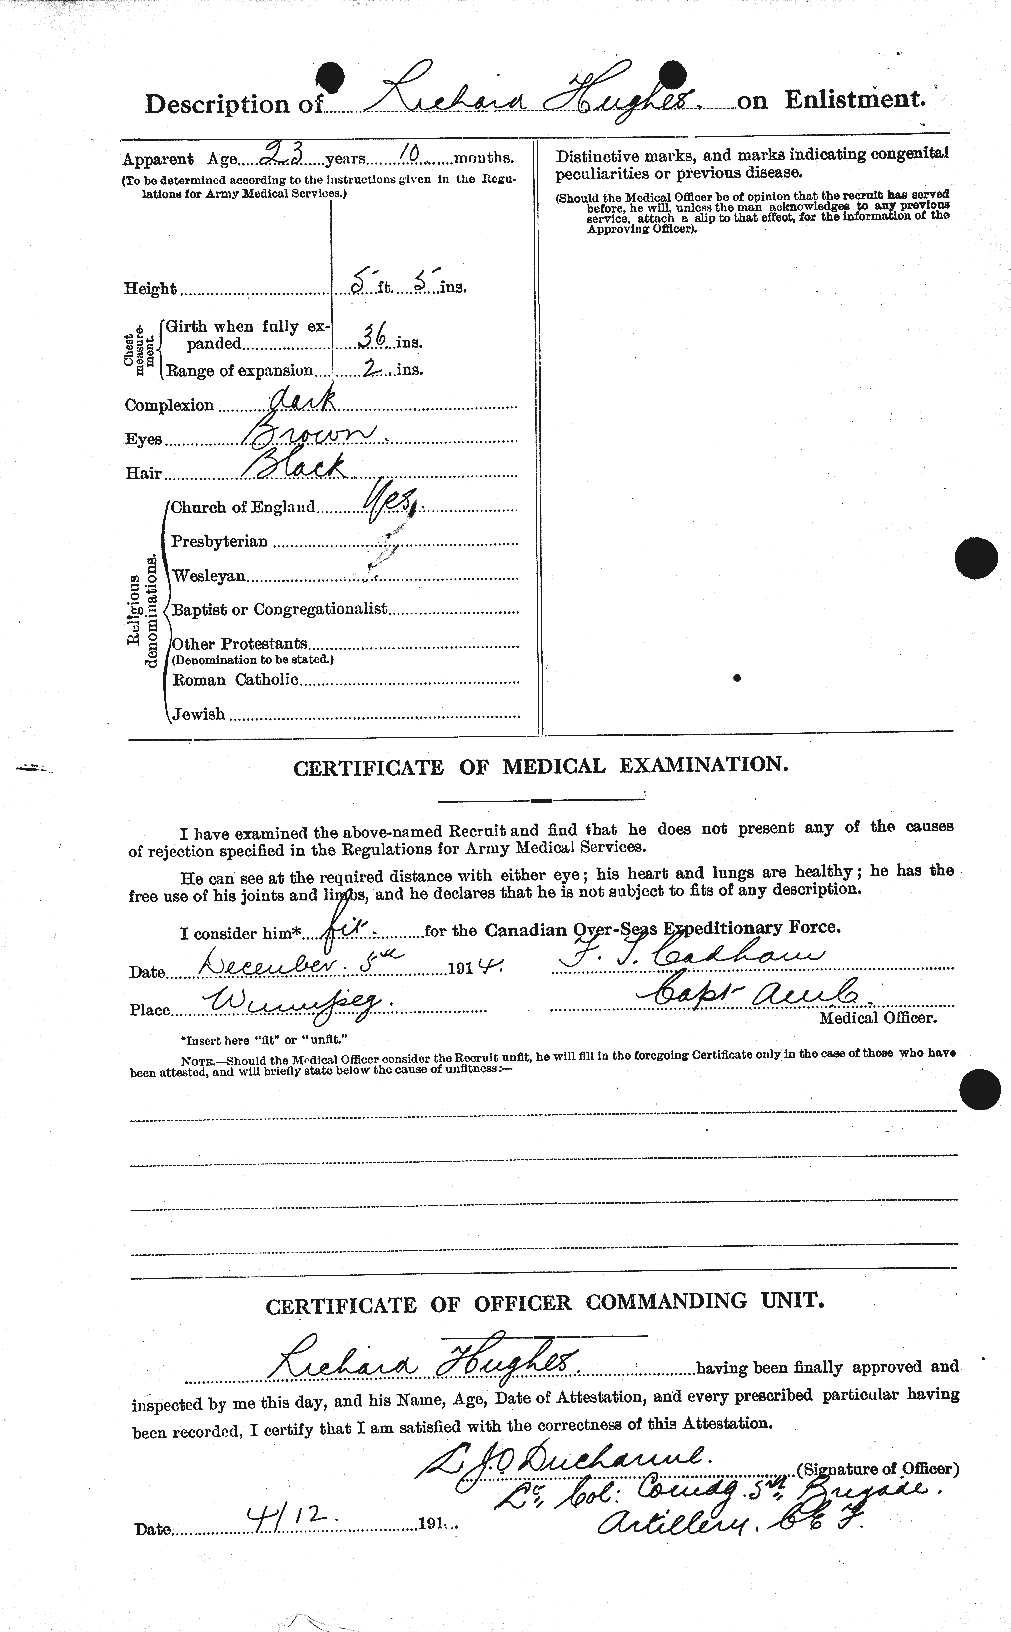 Personnel Records of the First World War - CEF 404179b